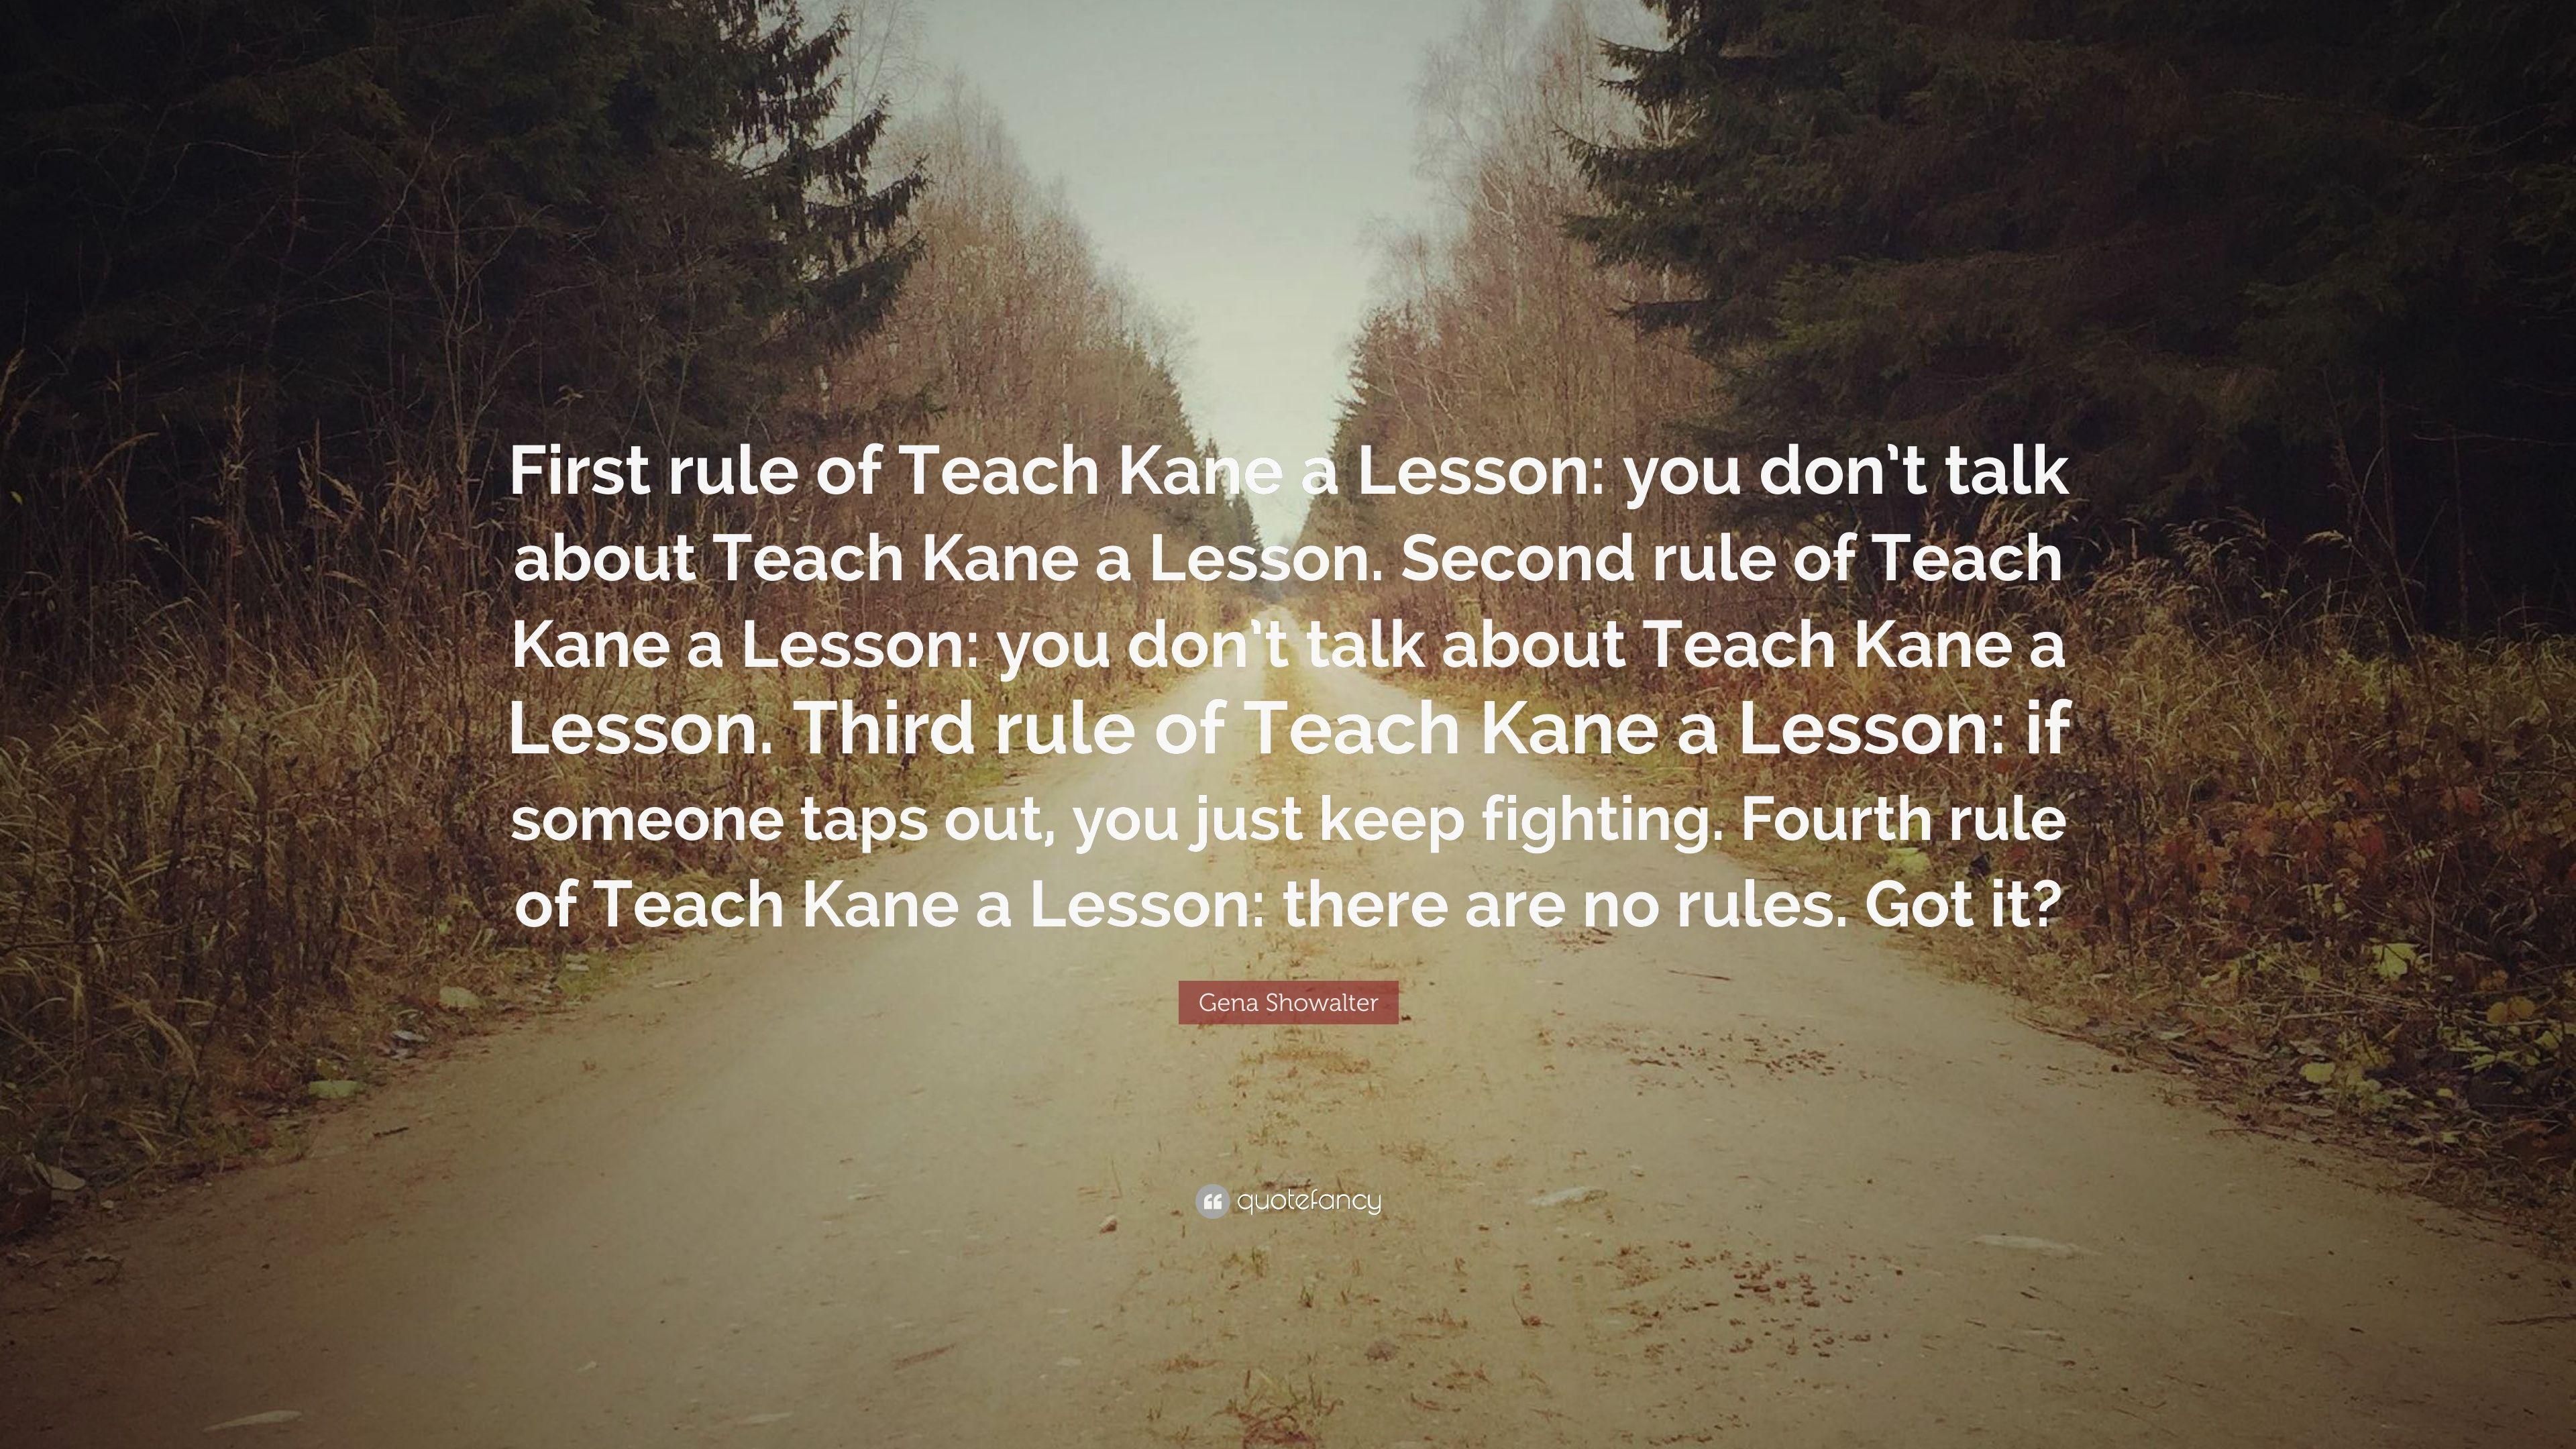 Gena Showalter Quote: “First rule of Teach Kane a Lesson: you don't